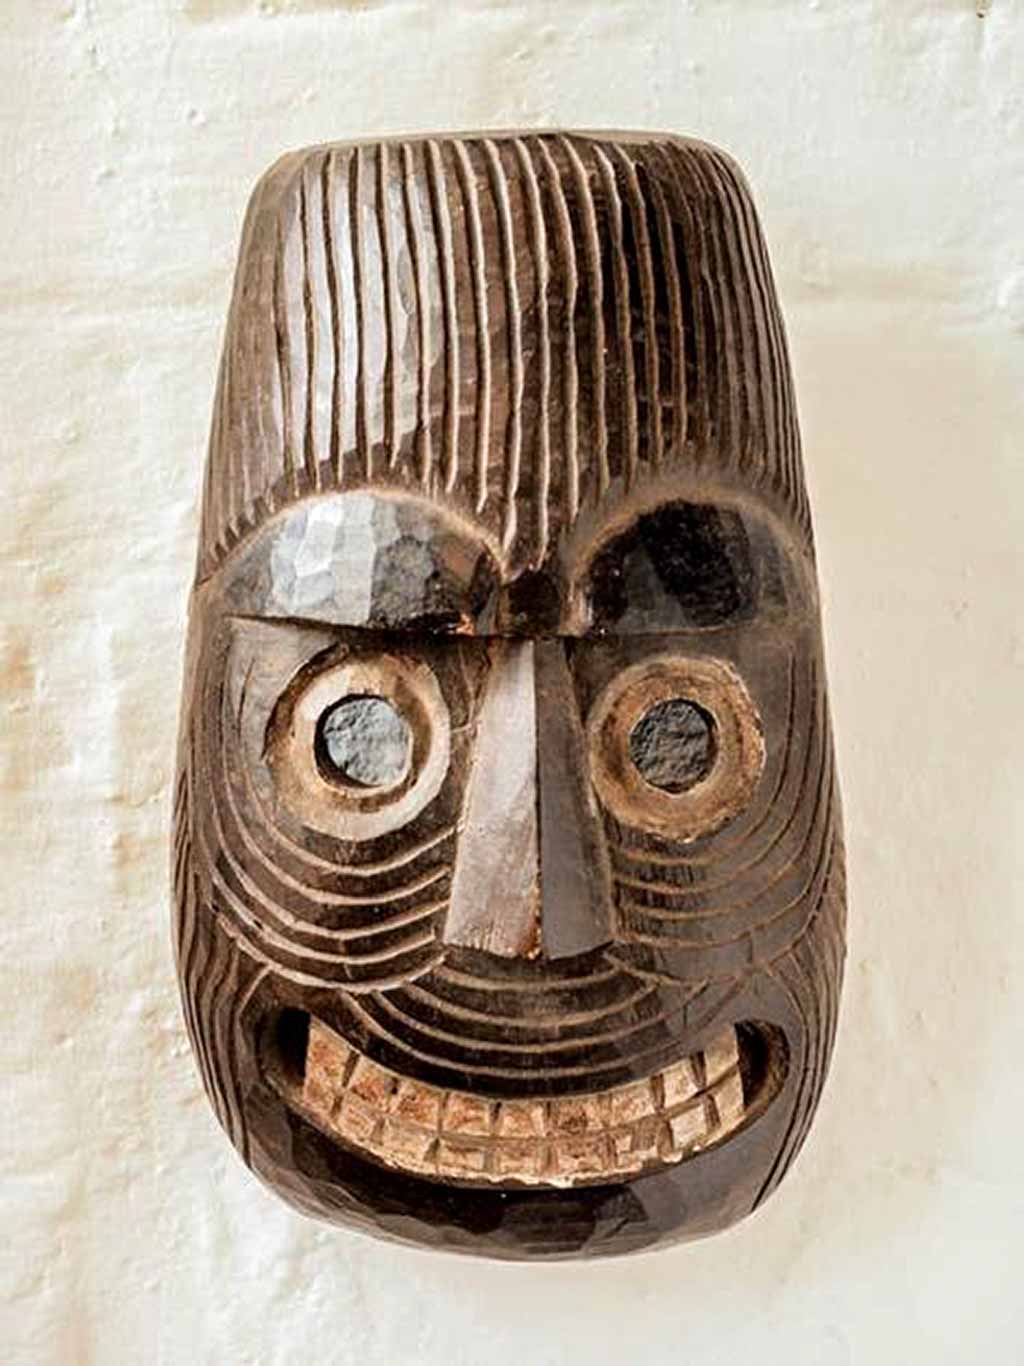 Grinning-wooden-mask from Nepal